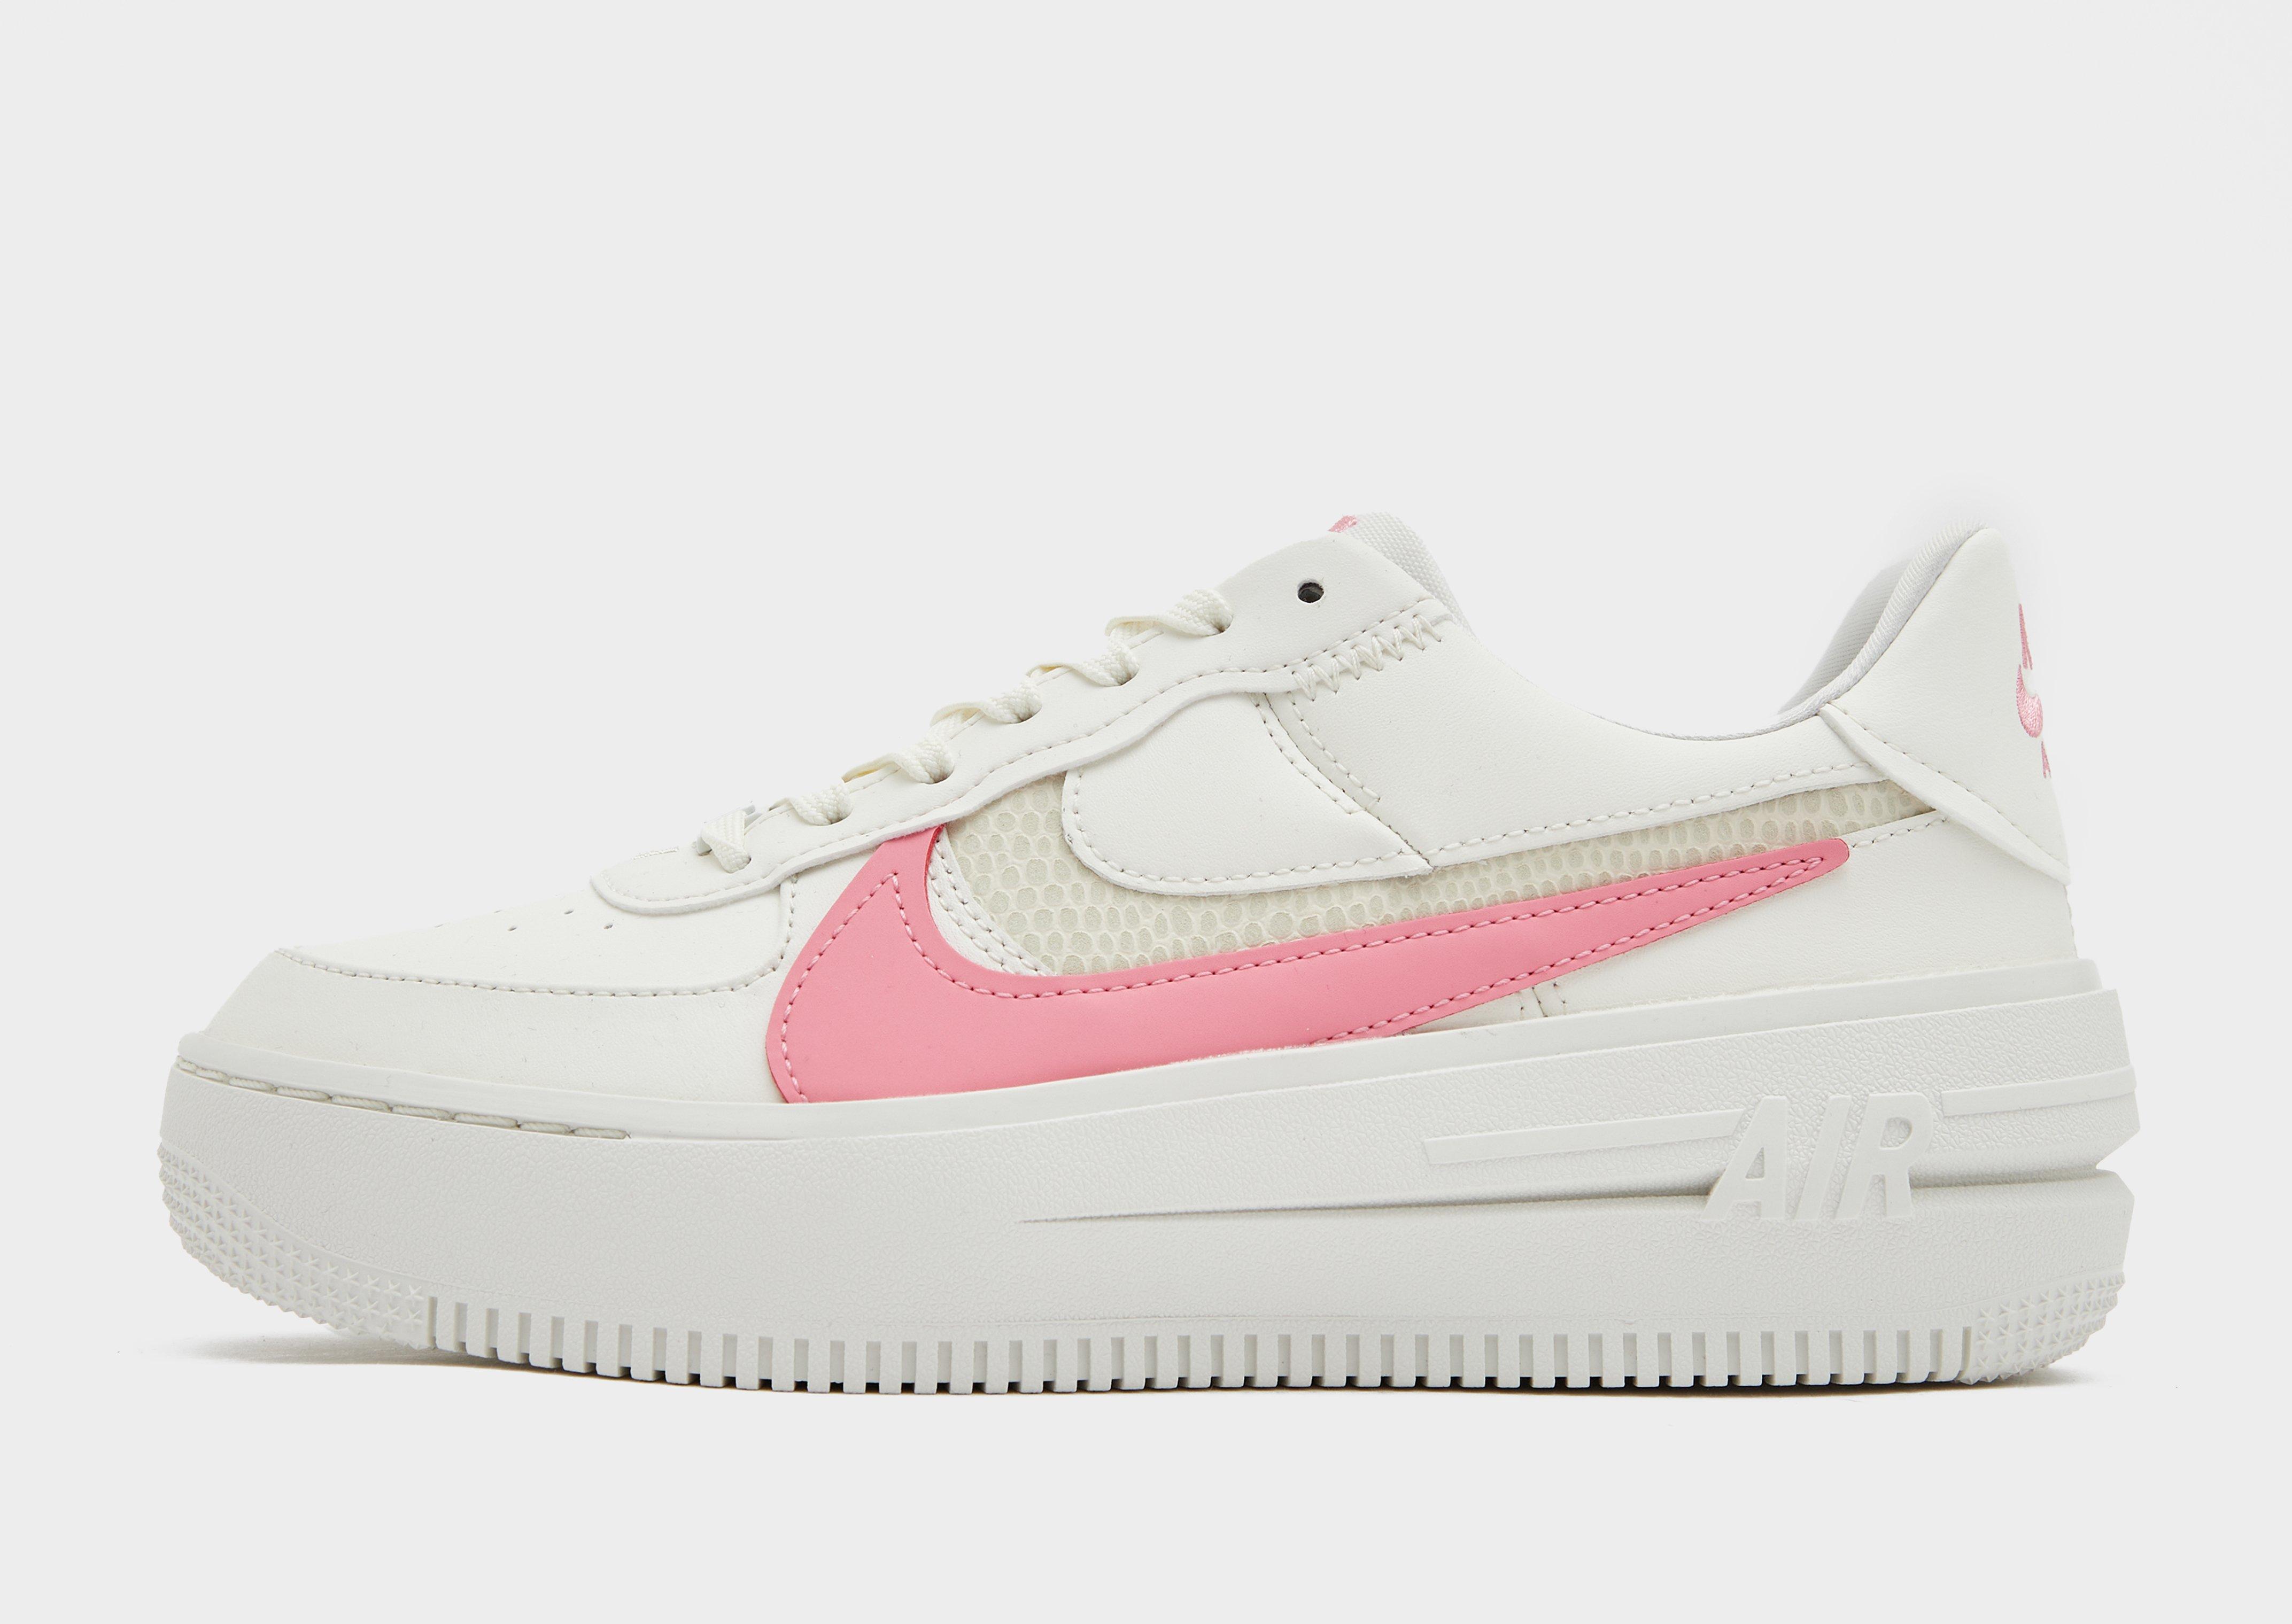 Nike Air Force 1 PLT.AF.ORM White Women's Shoes, Size: 5.5